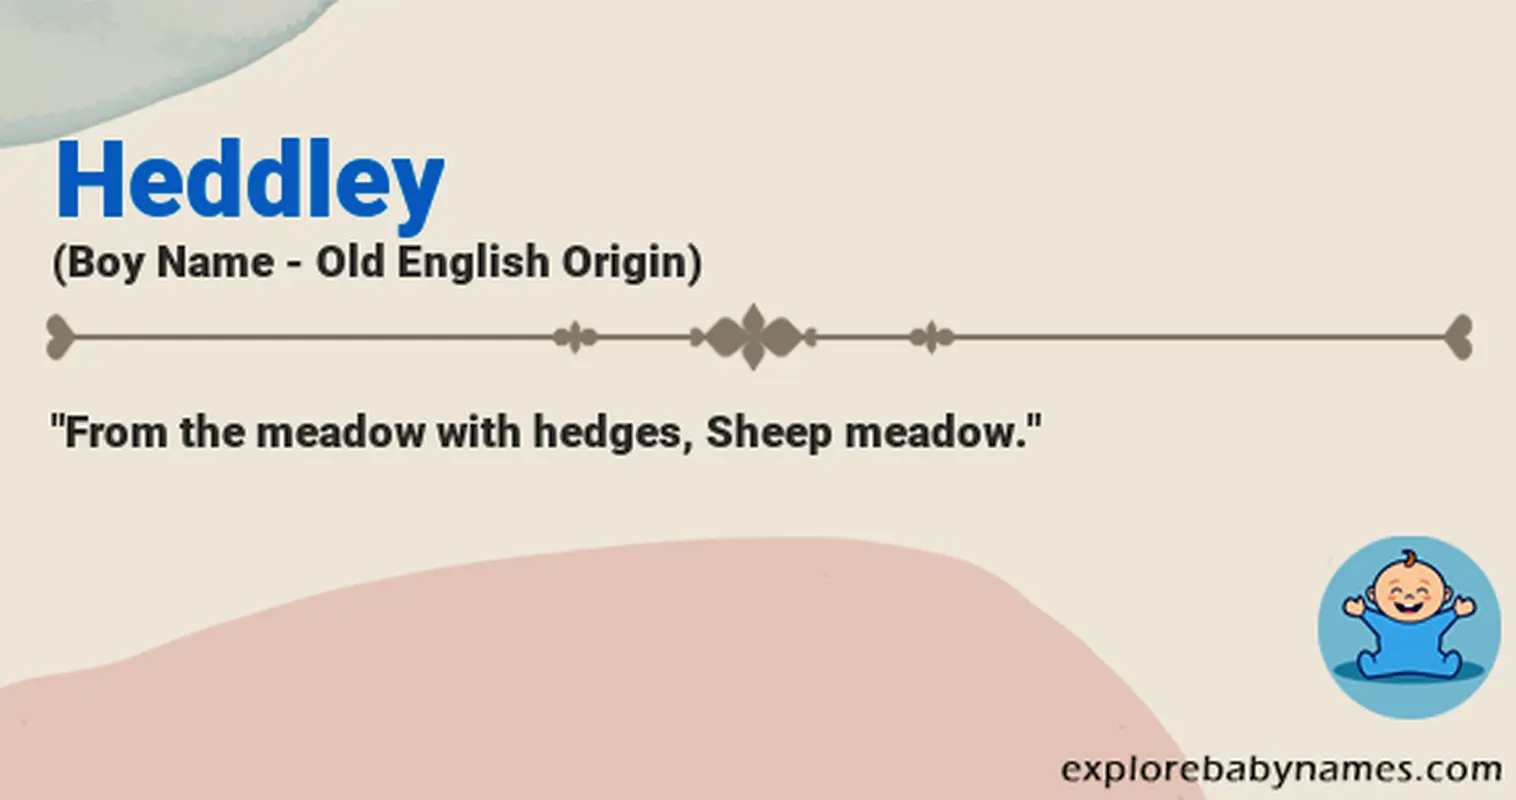 Meaning of Heddley